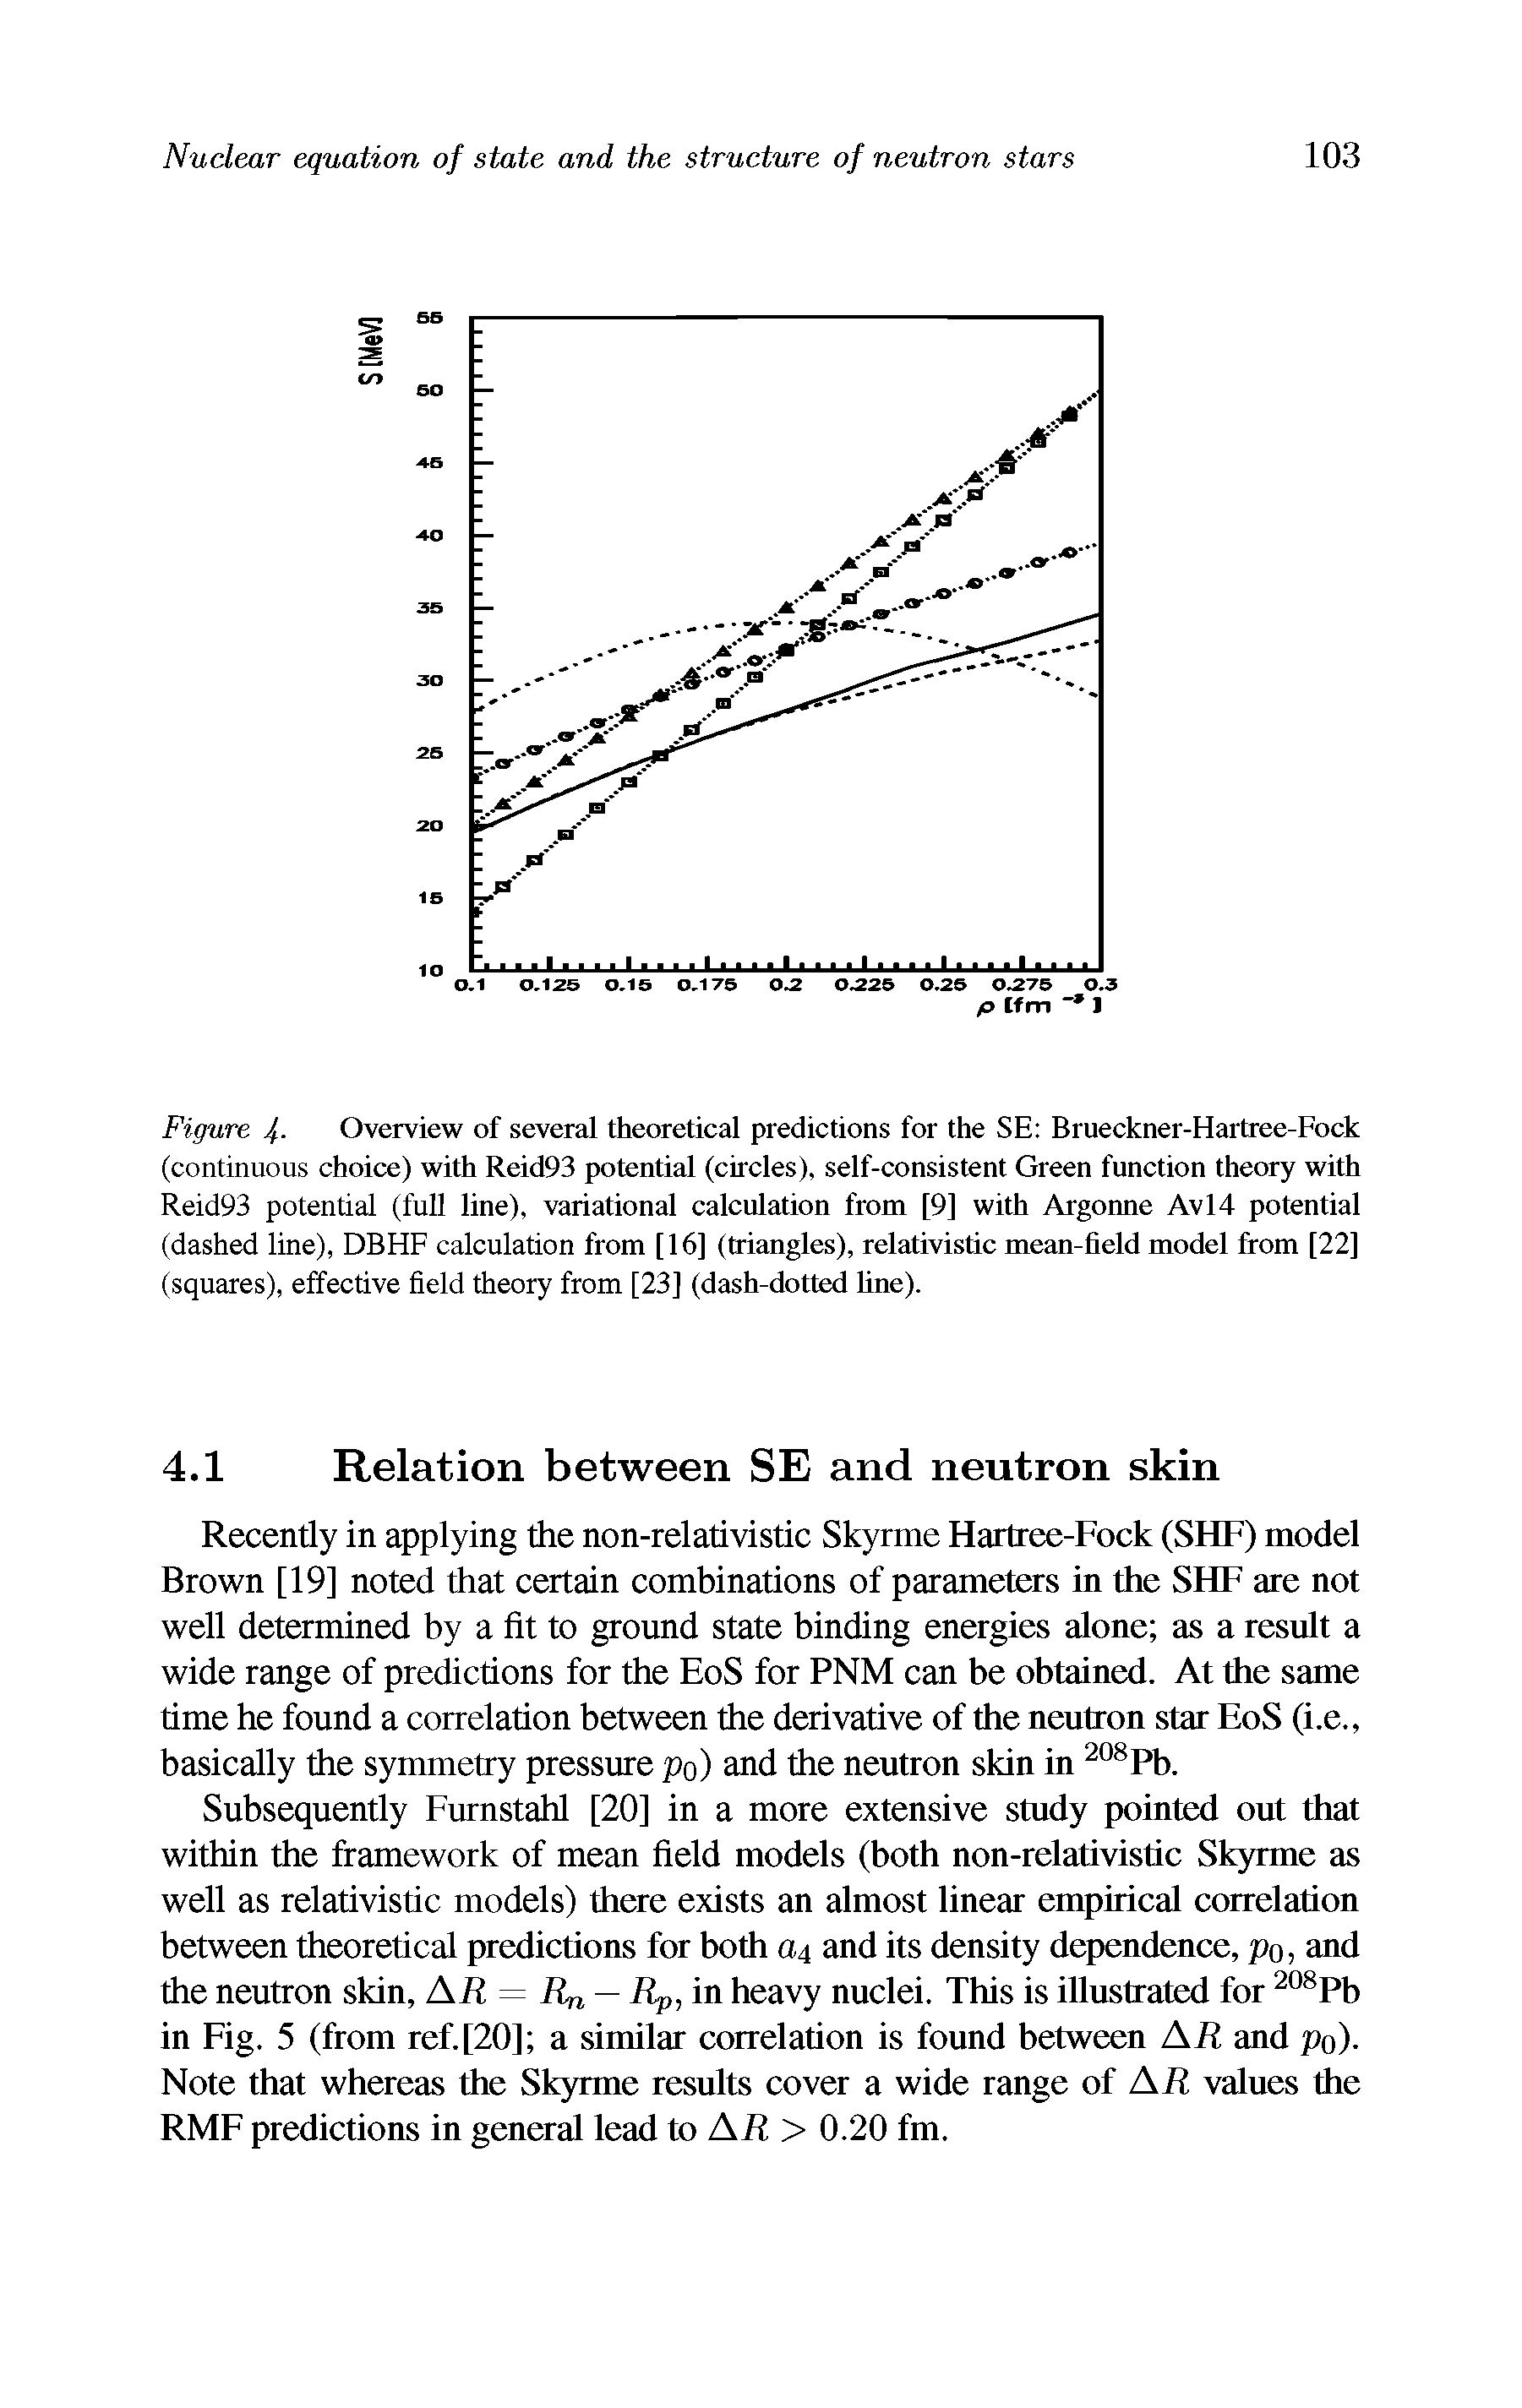 Figure 4 Overview of several theoretical predictions for the SE Brueckner-Hartree-Fock (continuous choice) with Reid93 potential (circles), self-consistent Green function theory with Reid93 potential (full line), variational calculation from [9] with Argonne Avl4 potential (dashed line), DBHF calculation from [16] (triangles), relativistic mean-field model from [22] (squares), effective field theory from [23] (dash-dotted fine).